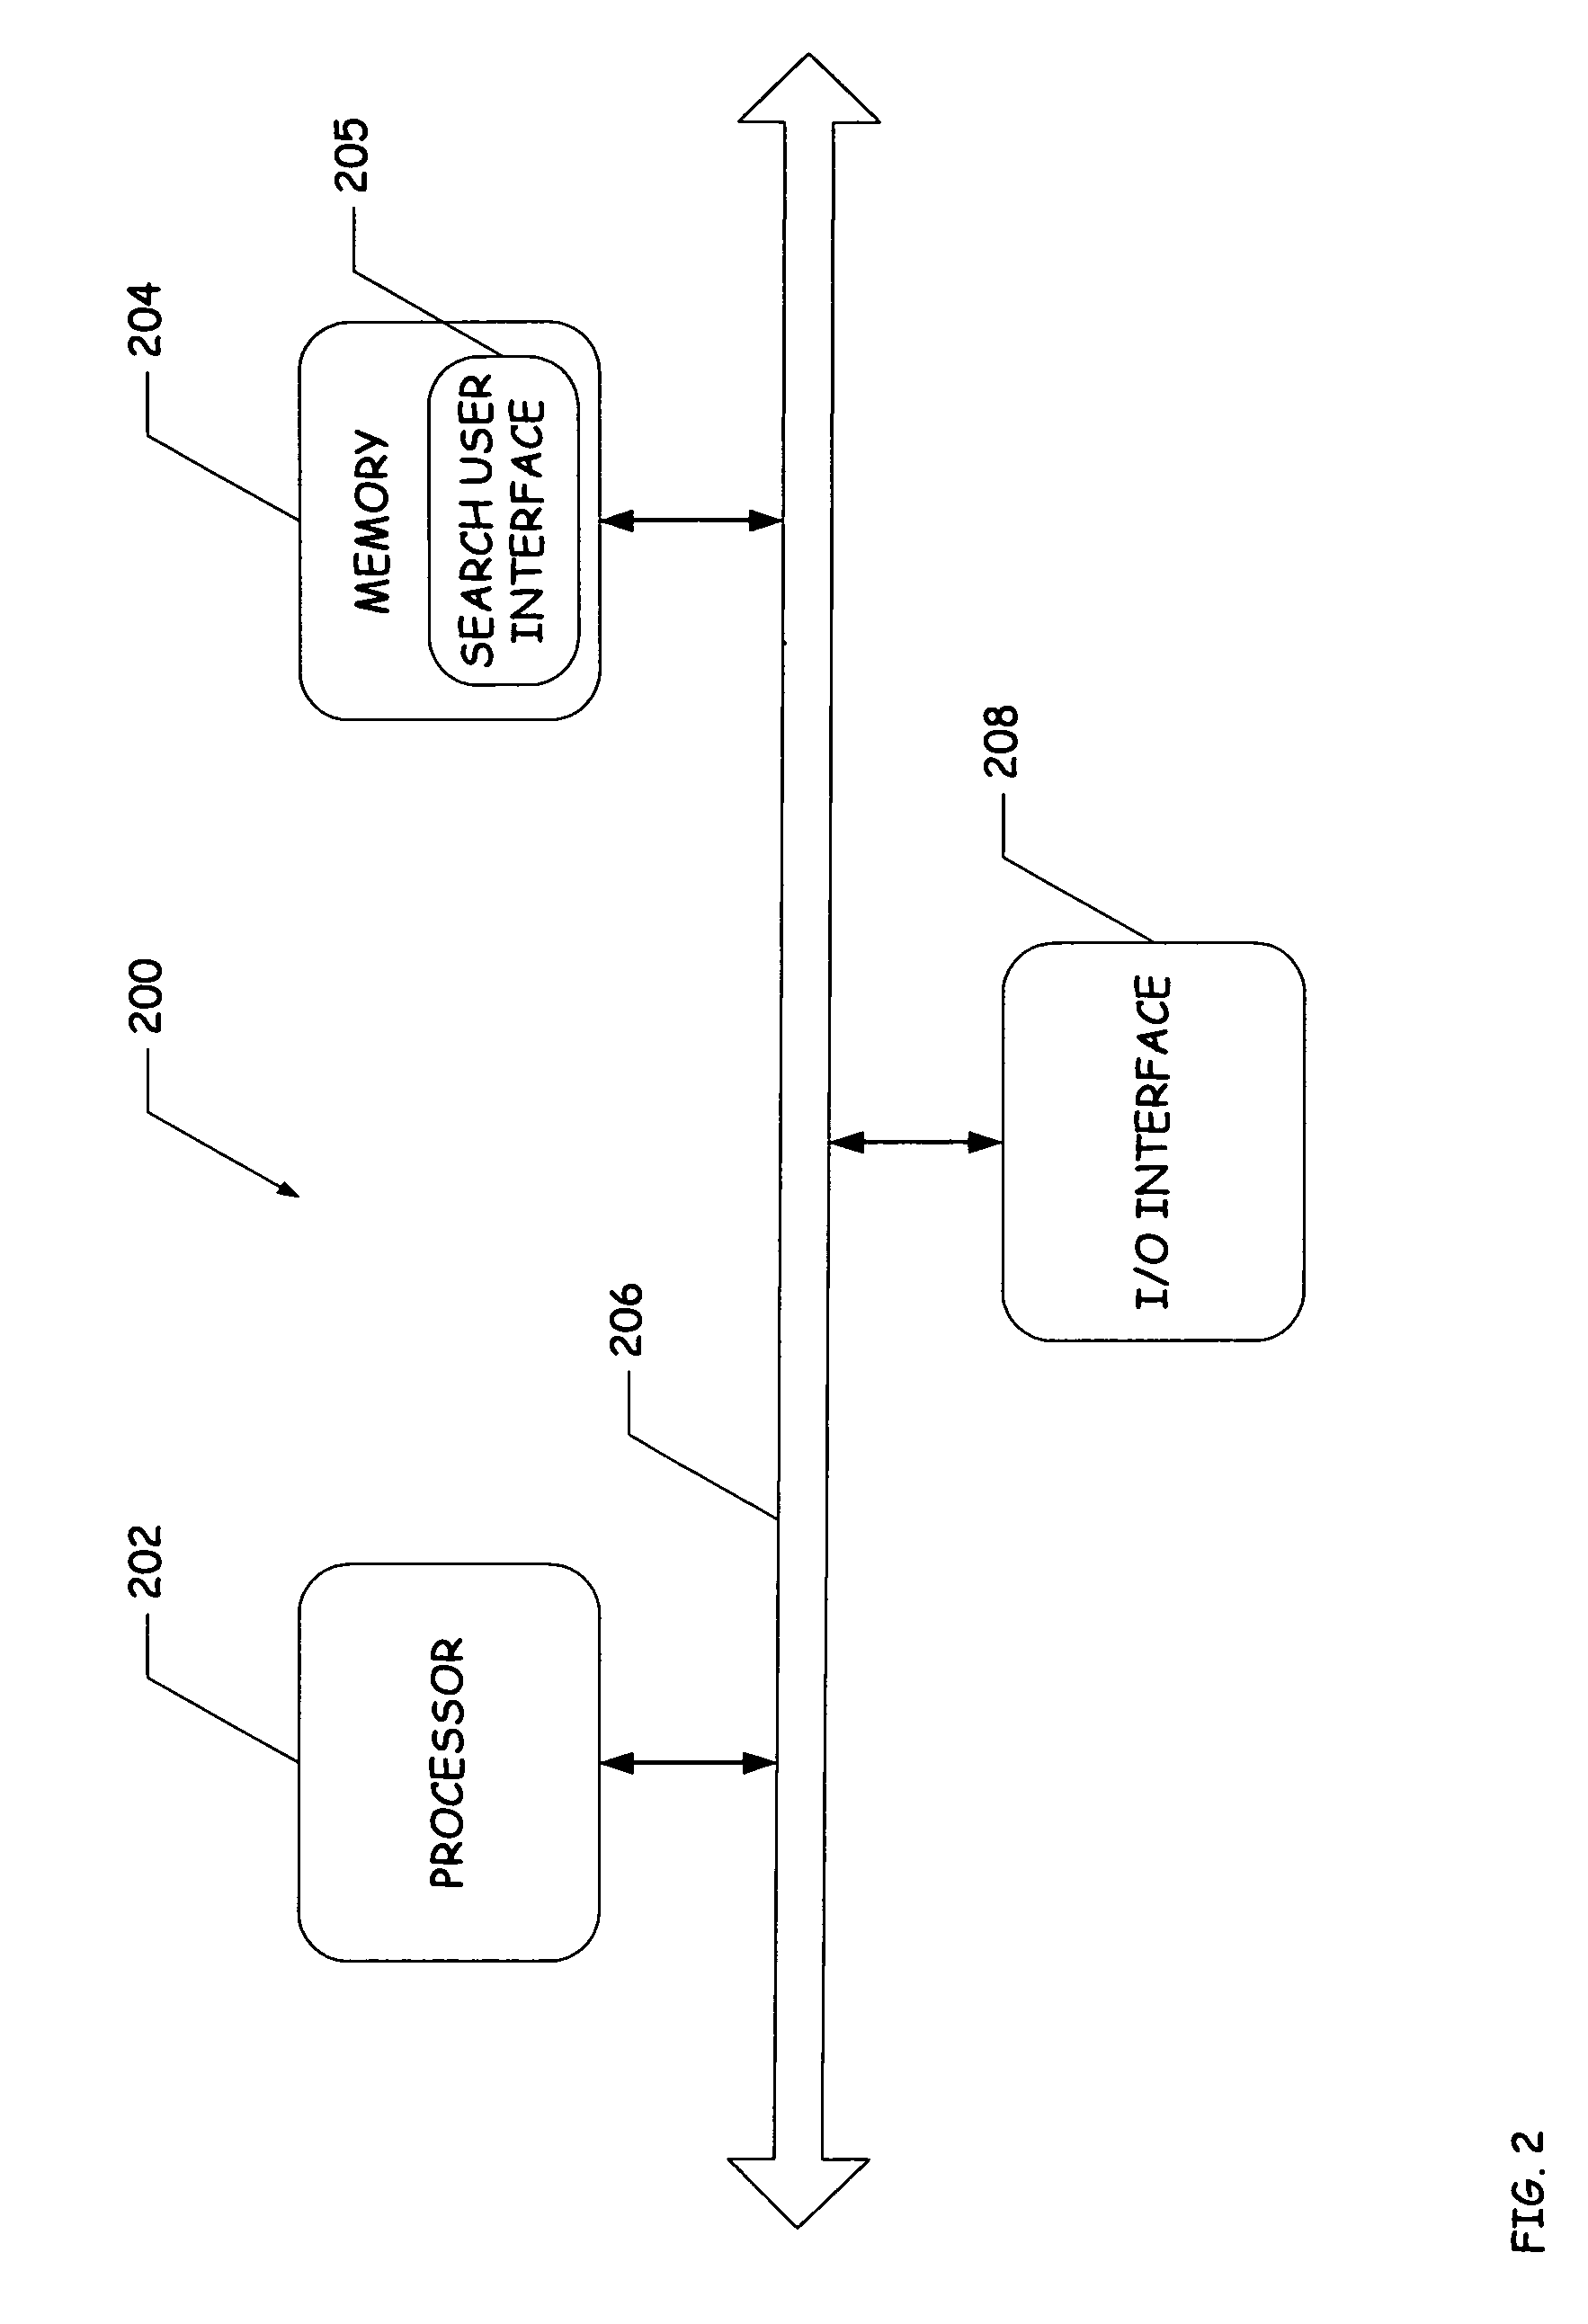 System and method for performing a search operation within a sequential access data storage subsystem